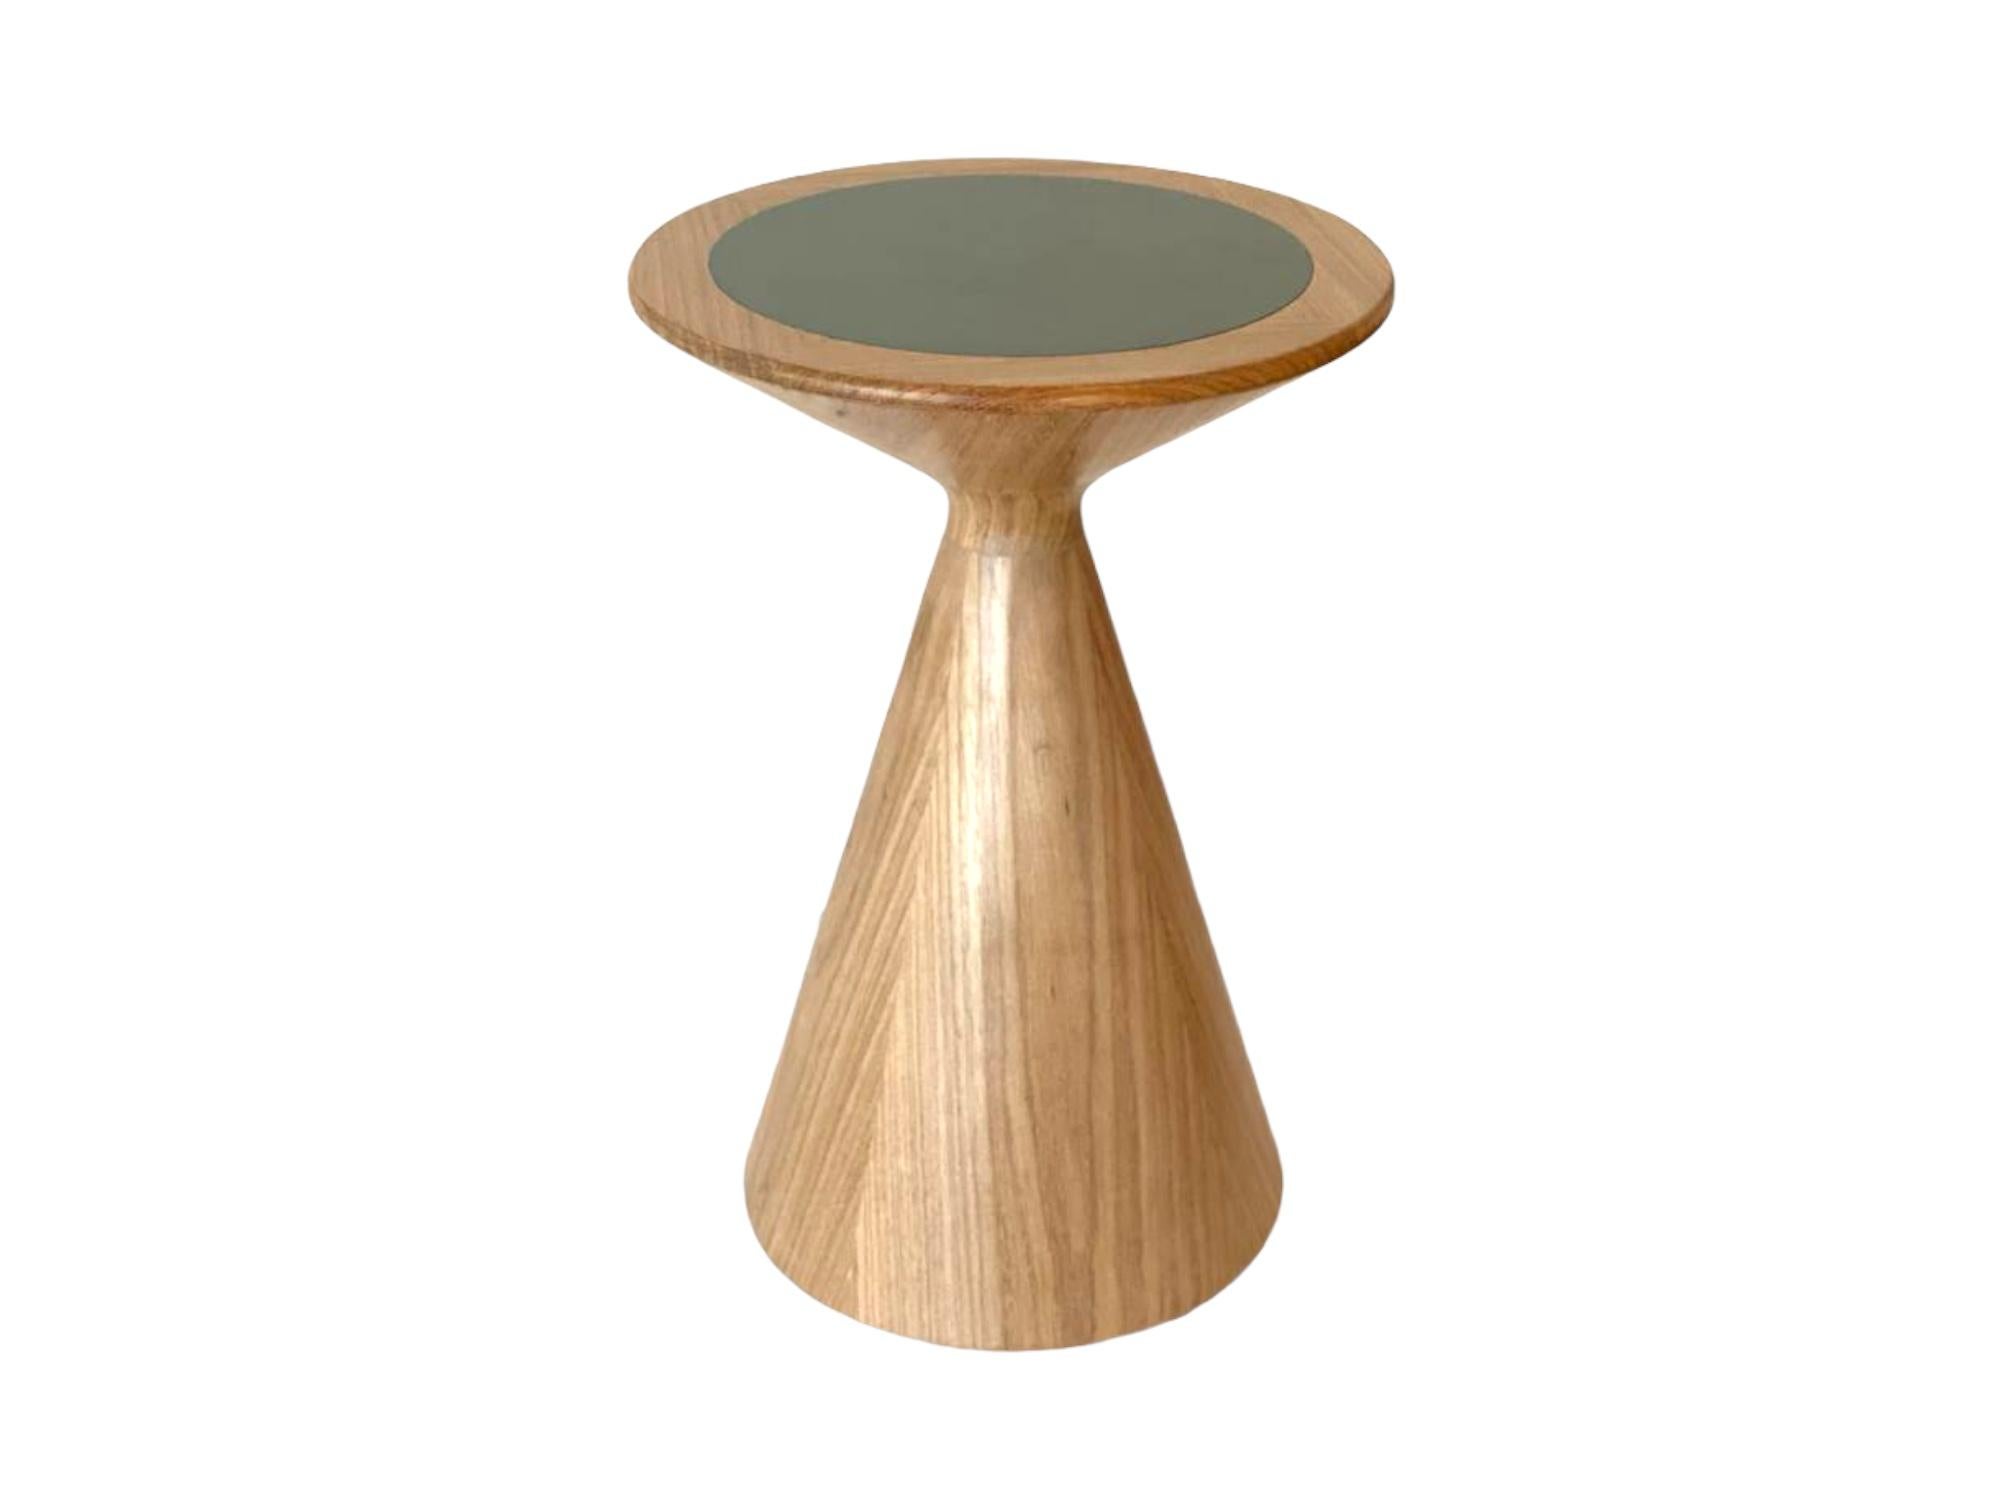 Brazilian Carioca Medium Sidetable and Stool in Freijo Wood For Sale